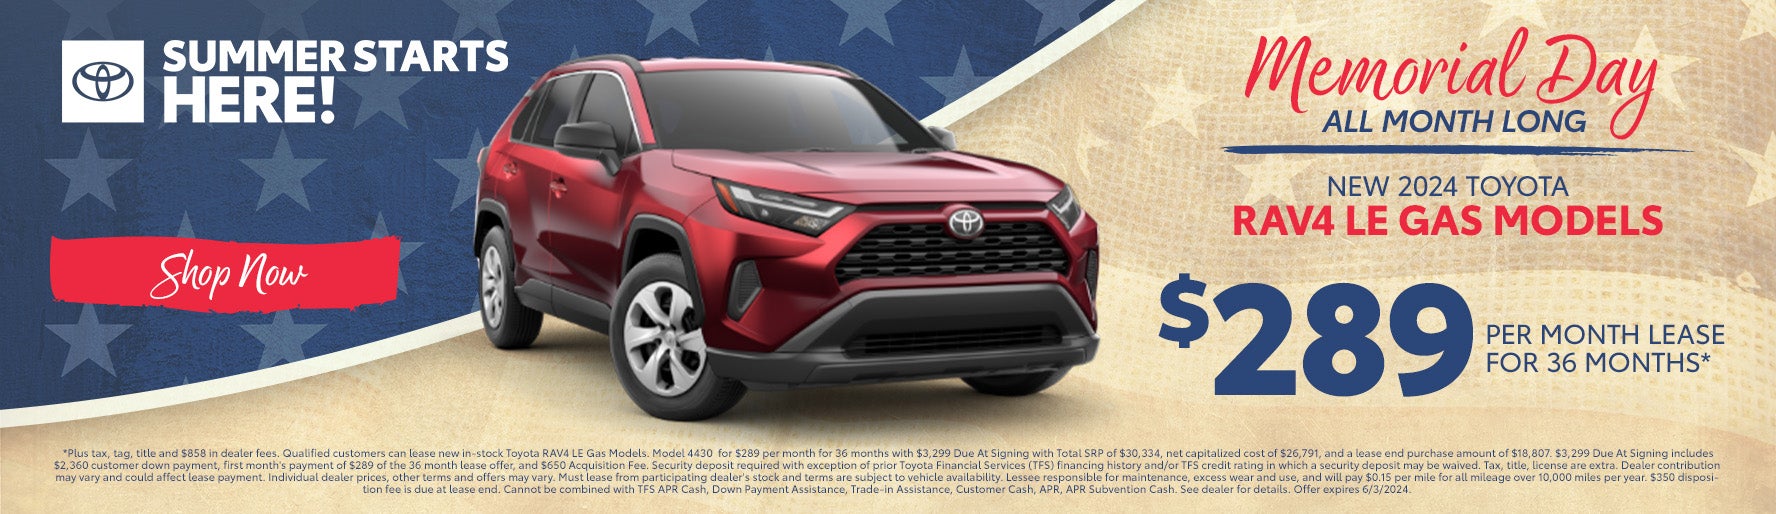 New 2024 Toyota RAV4 LE Gas Models $289/month for 36 months 